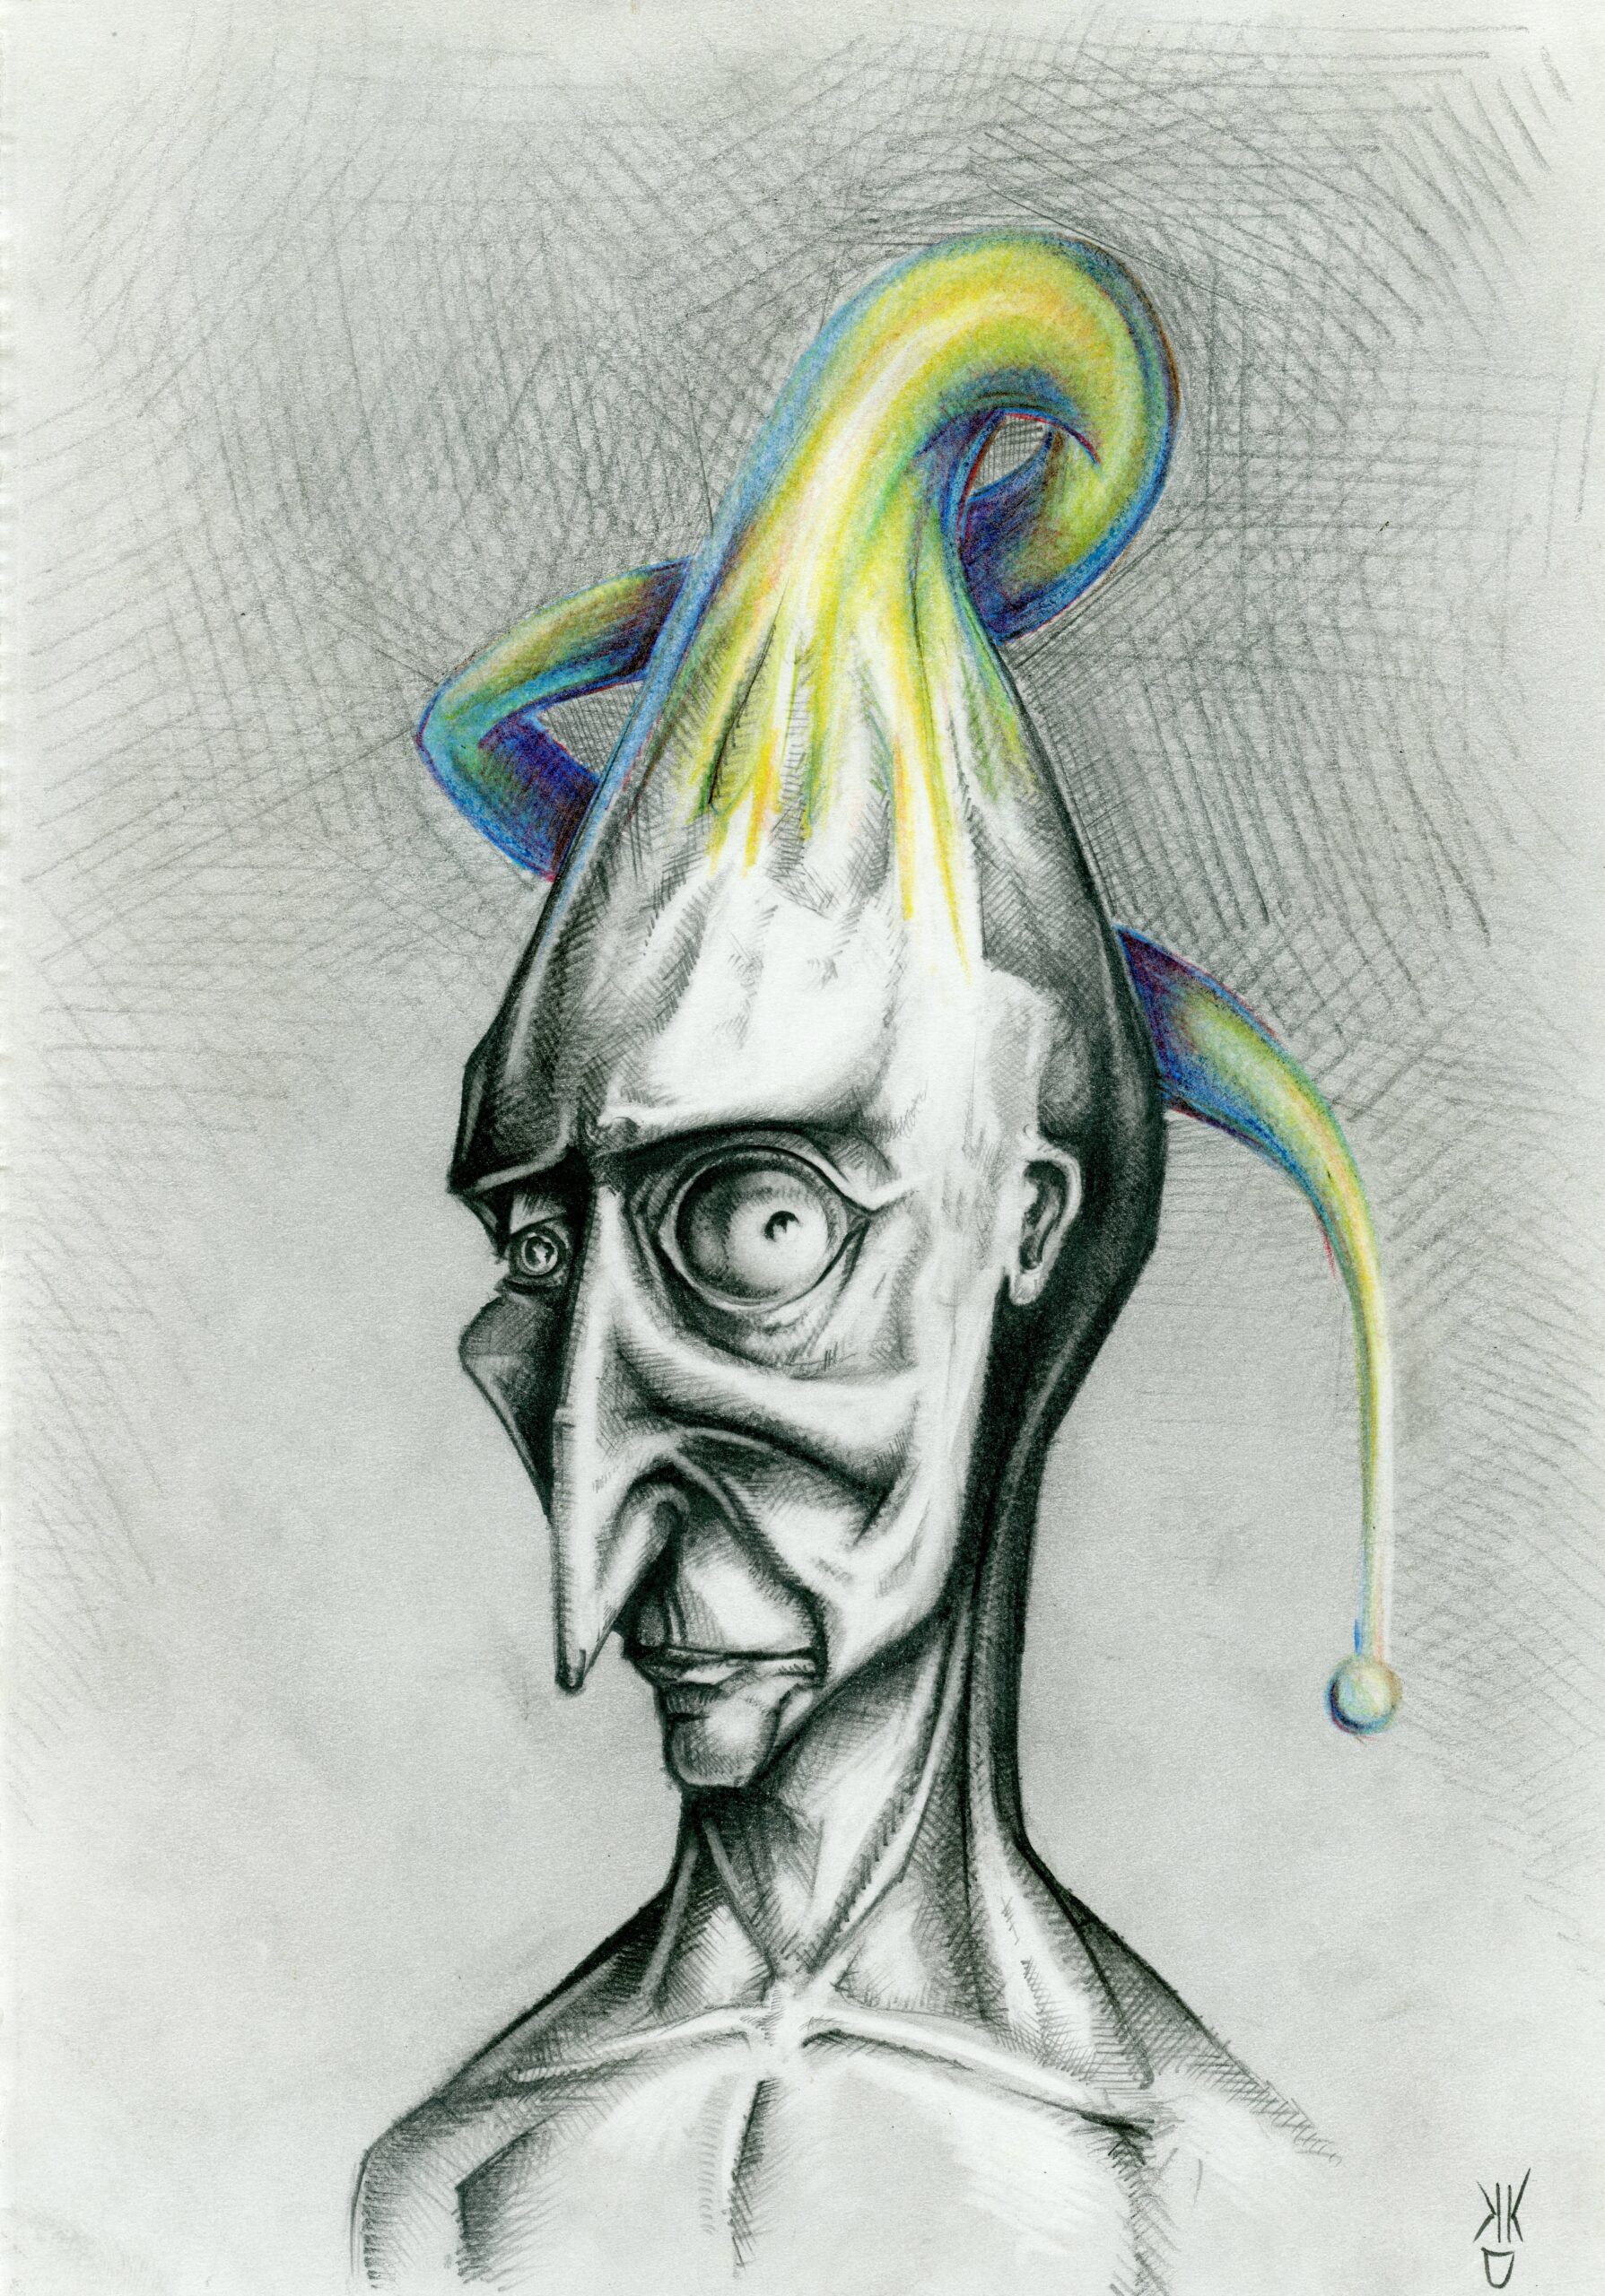 3. HNY., Hatters 3, 2020, pencil, paper, 29 x 21 cm, 190 euro